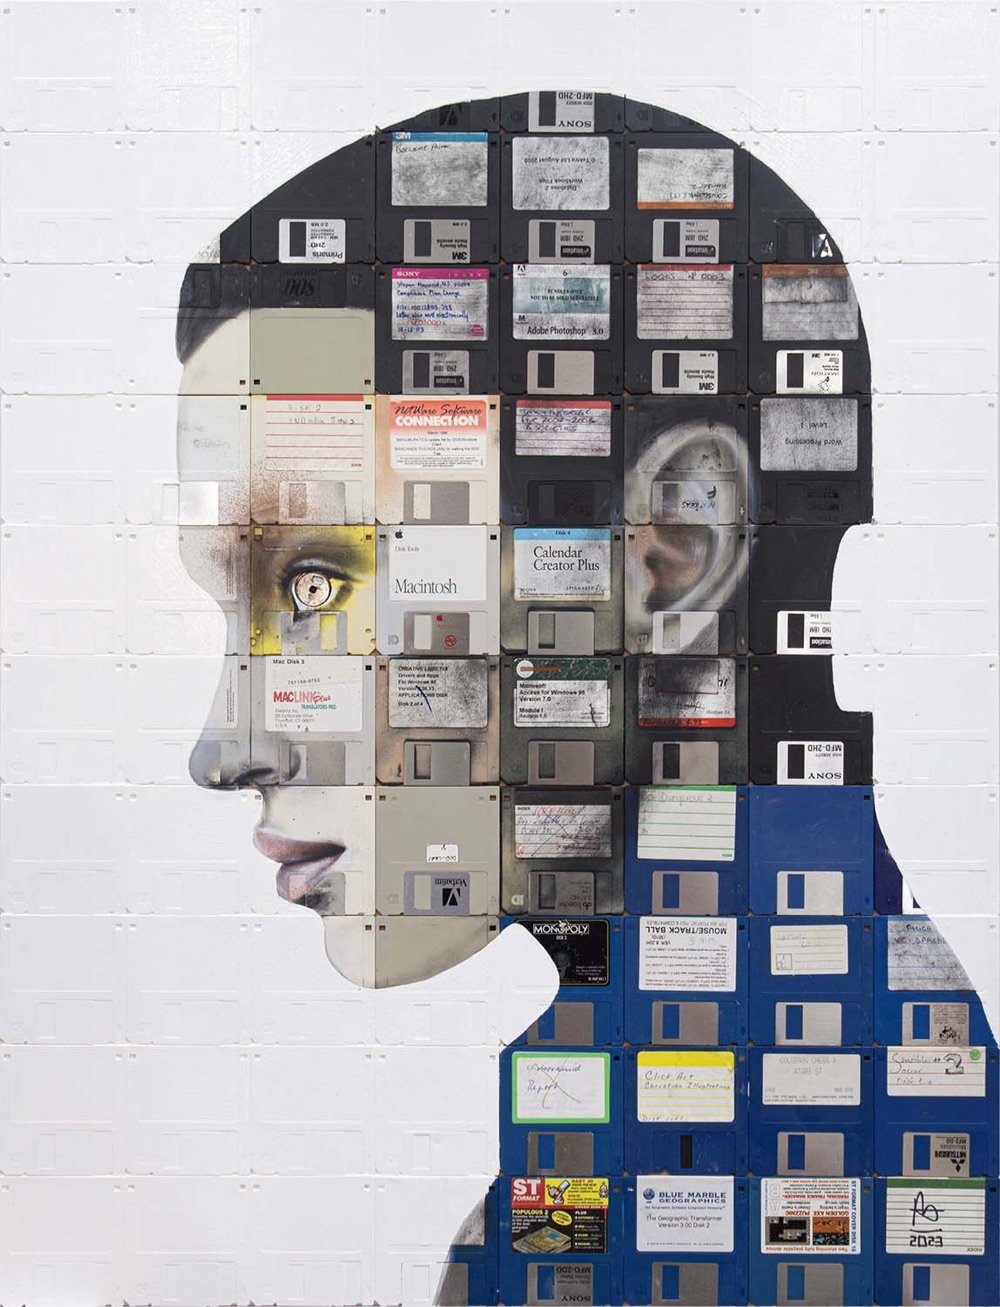 portrait of a person's head made out of floppy disks